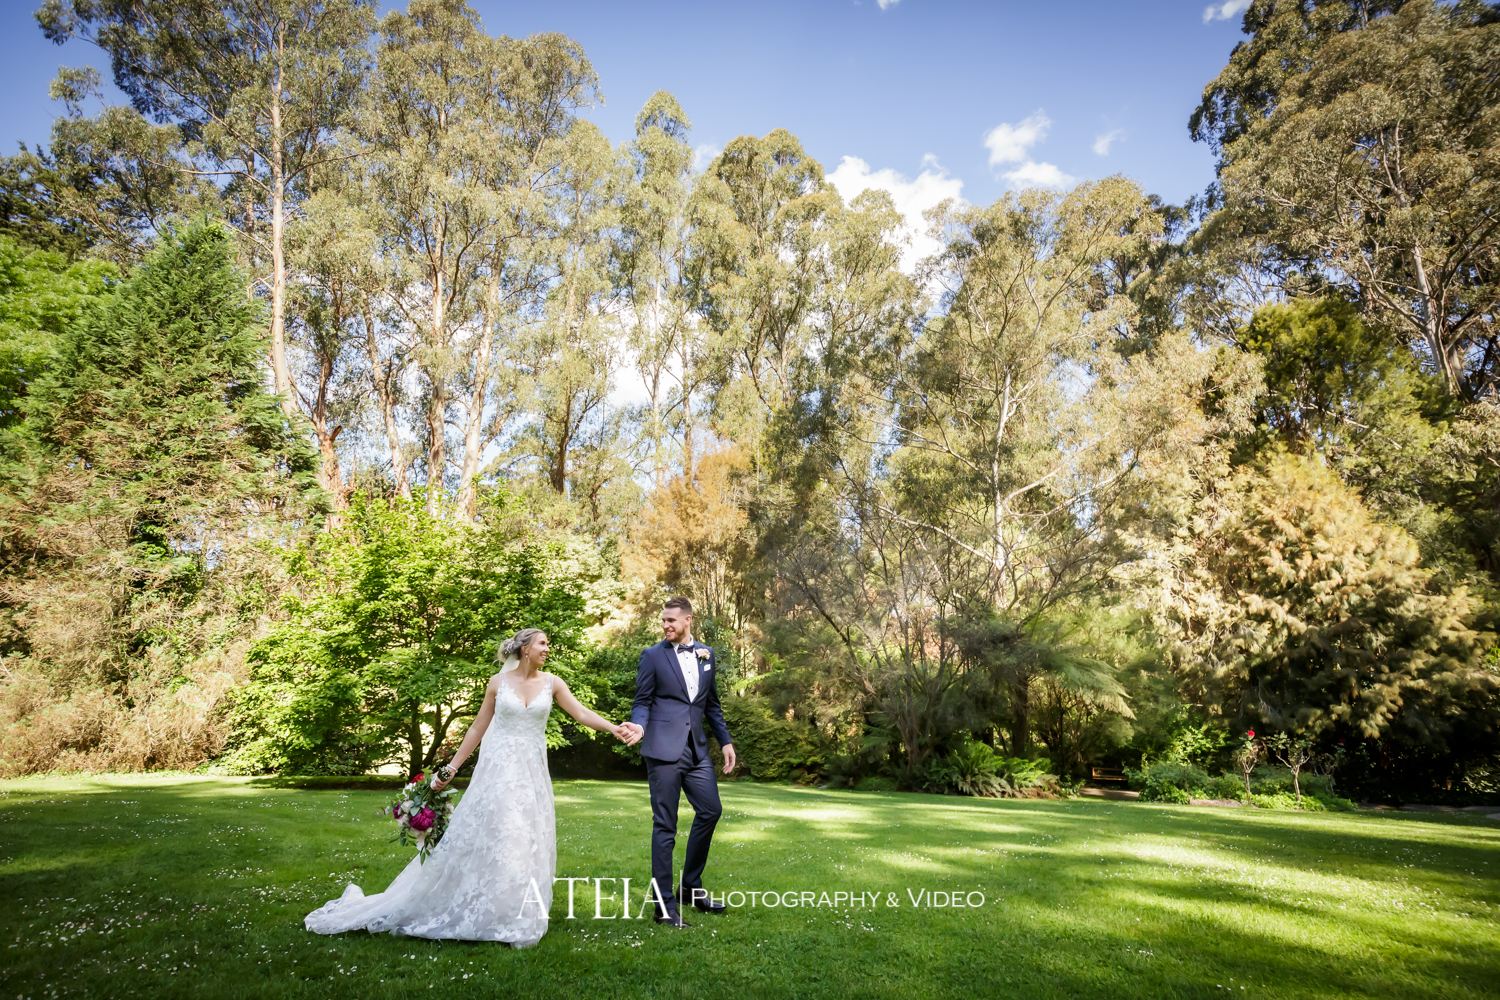 , Tatra Receptions Wedding Photography Melbourne by ATEIA Photography &#038; Video